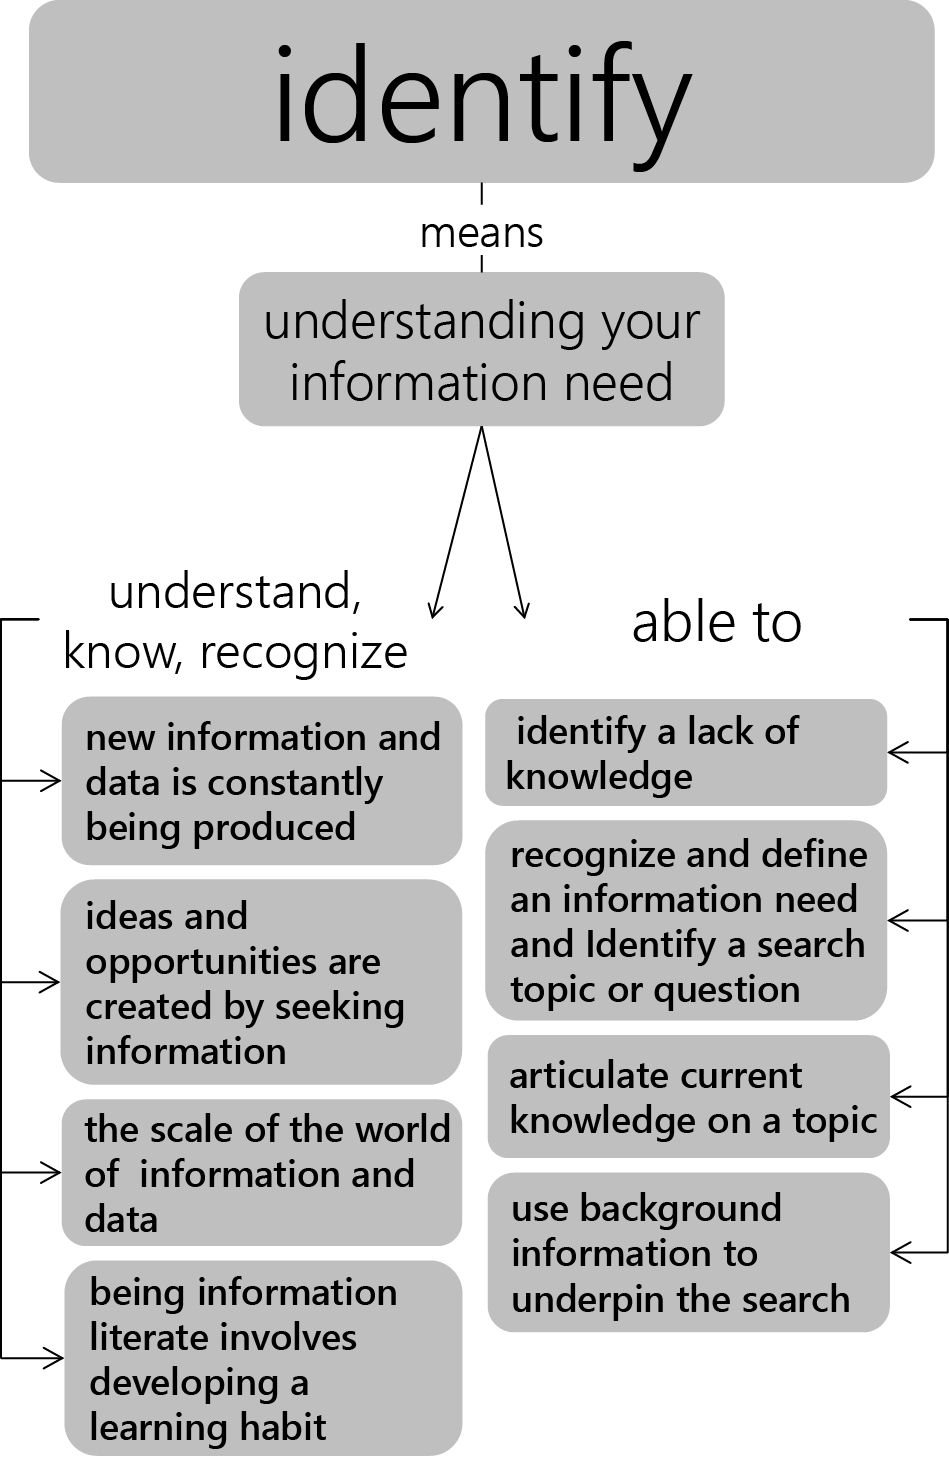 Visualization of the previously stated proficiencies in the Identify pillar, separating information the student should know from skills a student must master.